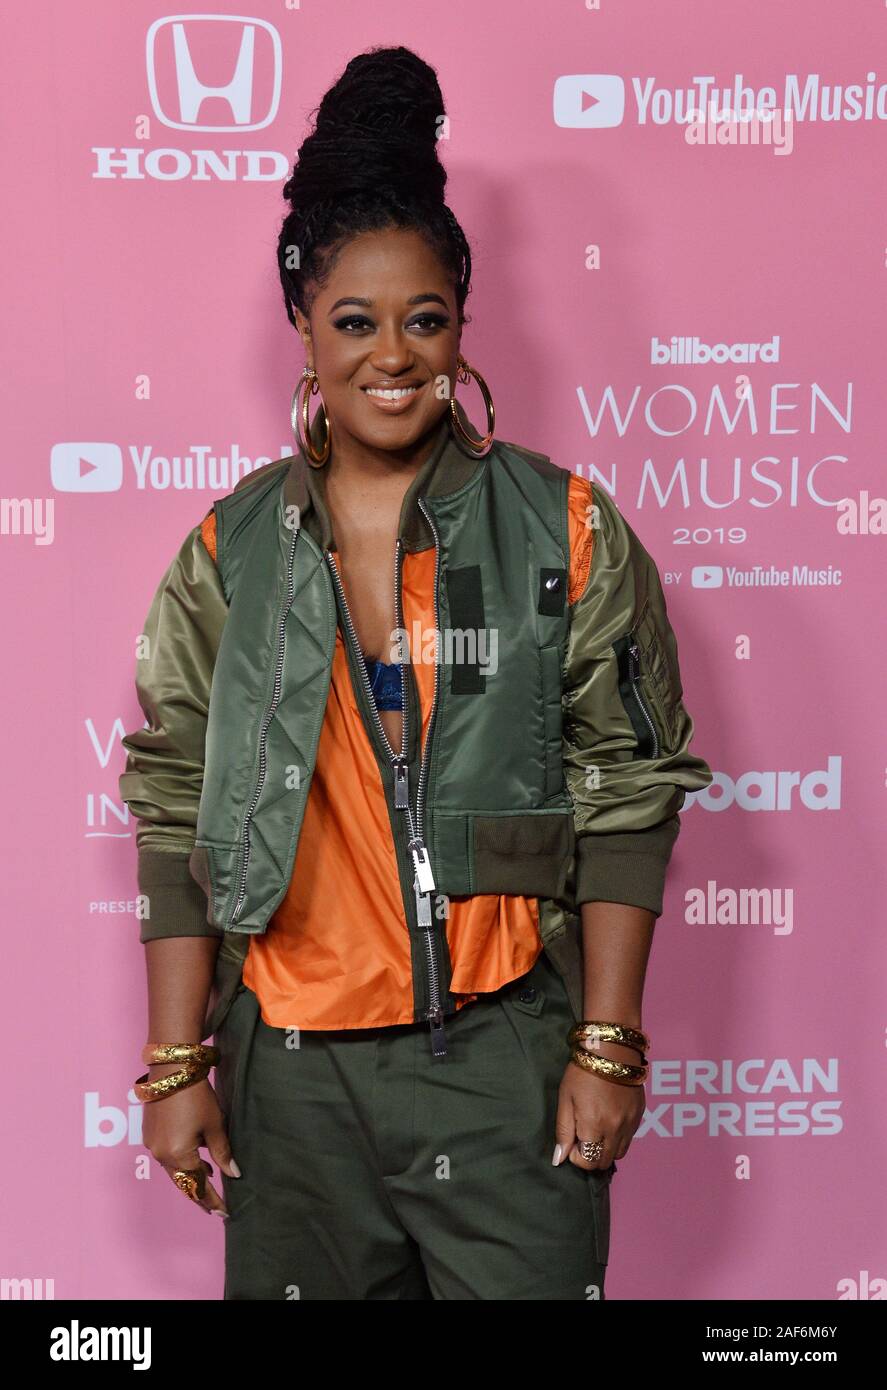 Los Angeles, United States. 13th Dec, 2019. Rapper Rapsody arrives for the 14th annual Billboard Women in Music event at the Hollywood Palladium in Los Angeles on Thursday, December 12, 2019. Taylor Swift became the first-ever recipient of Billboard's Woman of the Decade Award. Alanis Morissette, Nicki Minaj, Brandi Carlile and Roc Nation chief operating officer Desiree Perez were also honored at the gathering. Photo by Jim Ruymen/UPI Credit: UPI/Alamy Live News Stock Photo